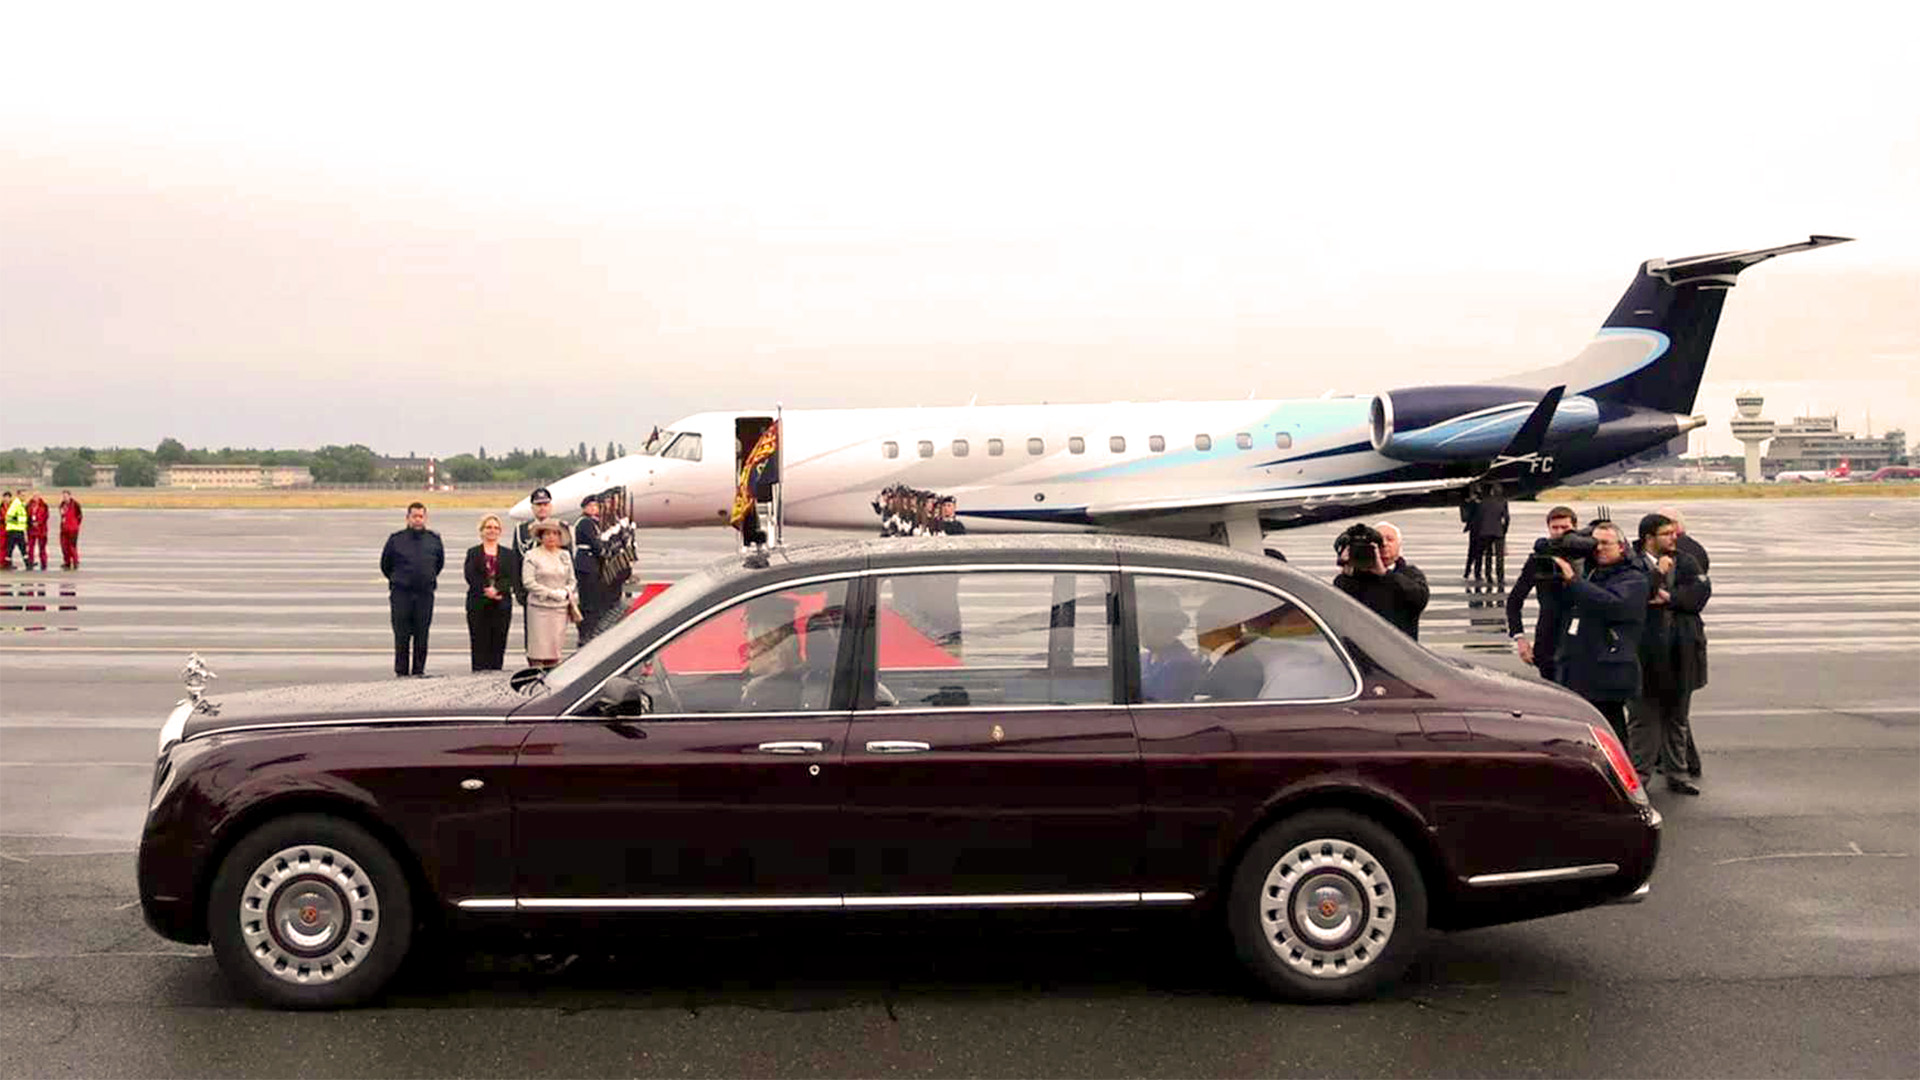 To commemorate her 50-year reign, Elizabeth II received two unique units of this royal car, the Bentley State Limousine